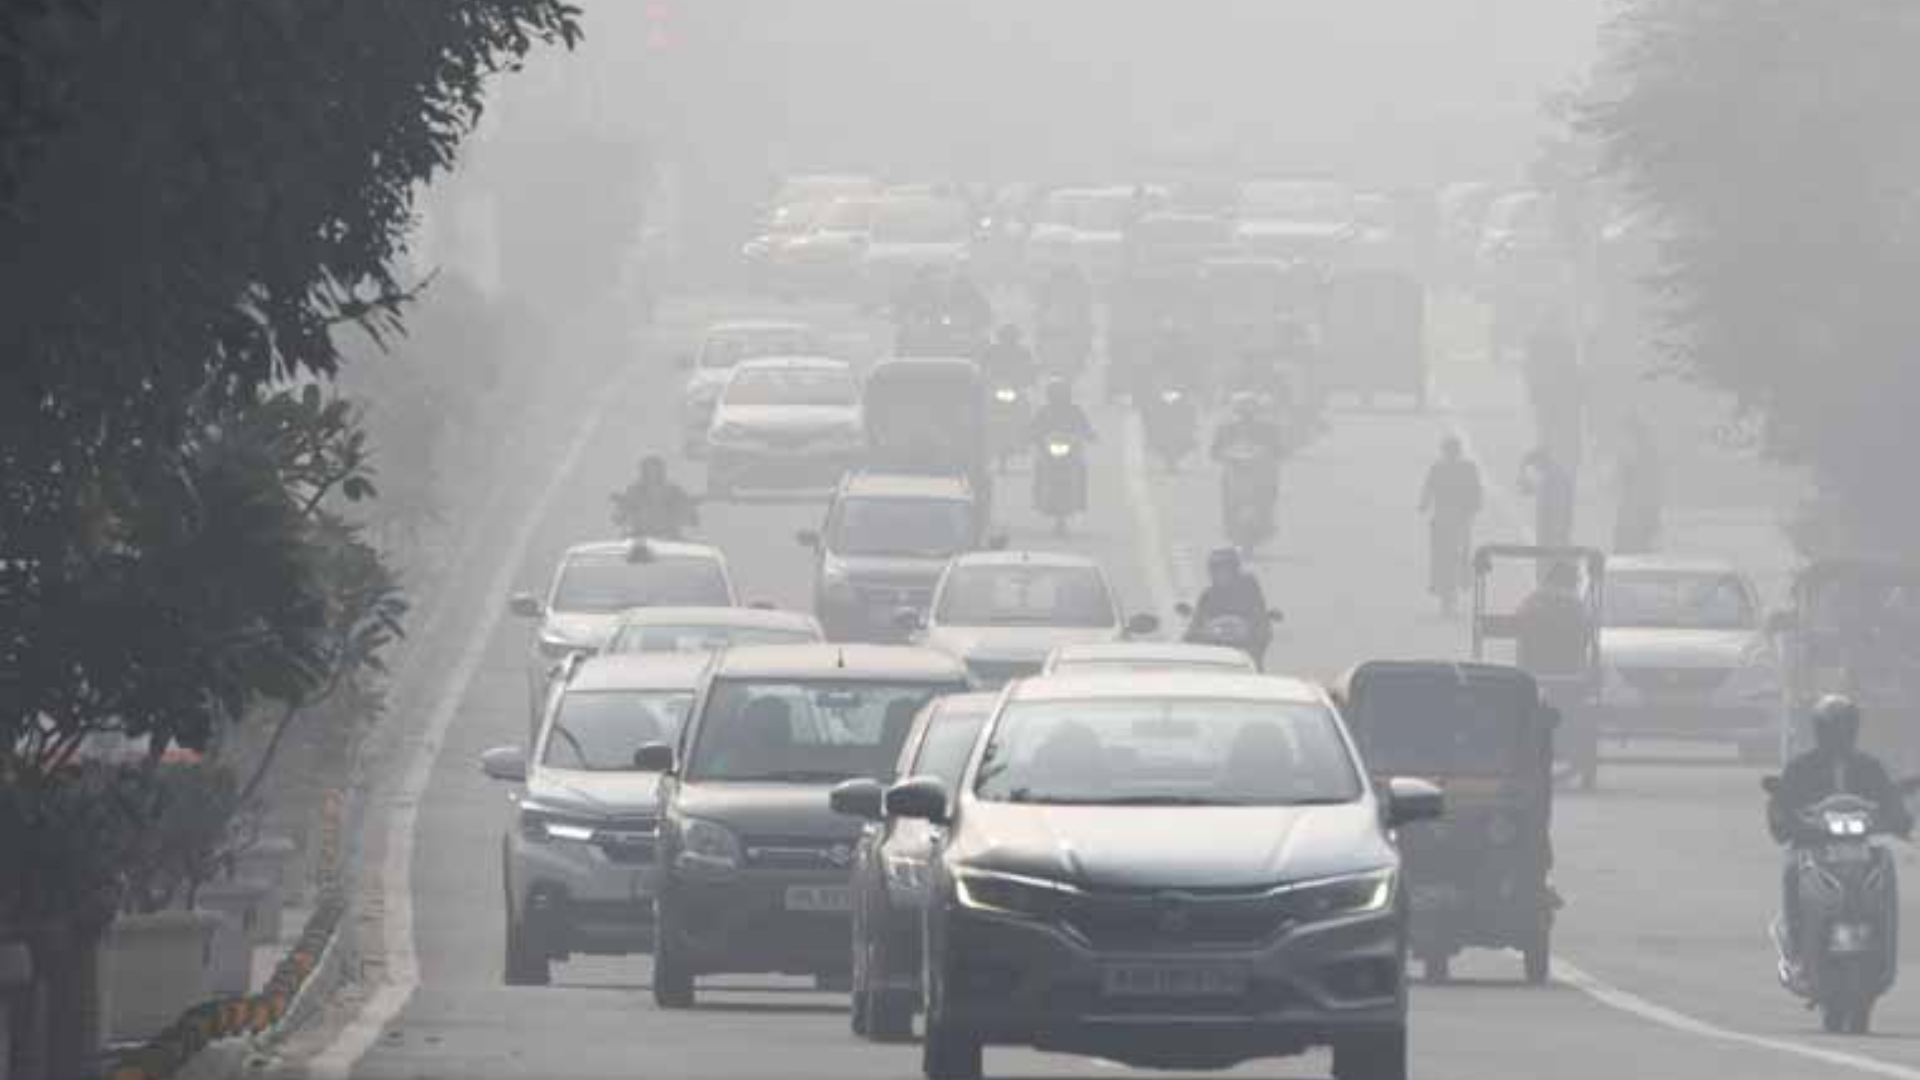 Delhi: Heavy fog delays 22 trains and interferes with flying operations